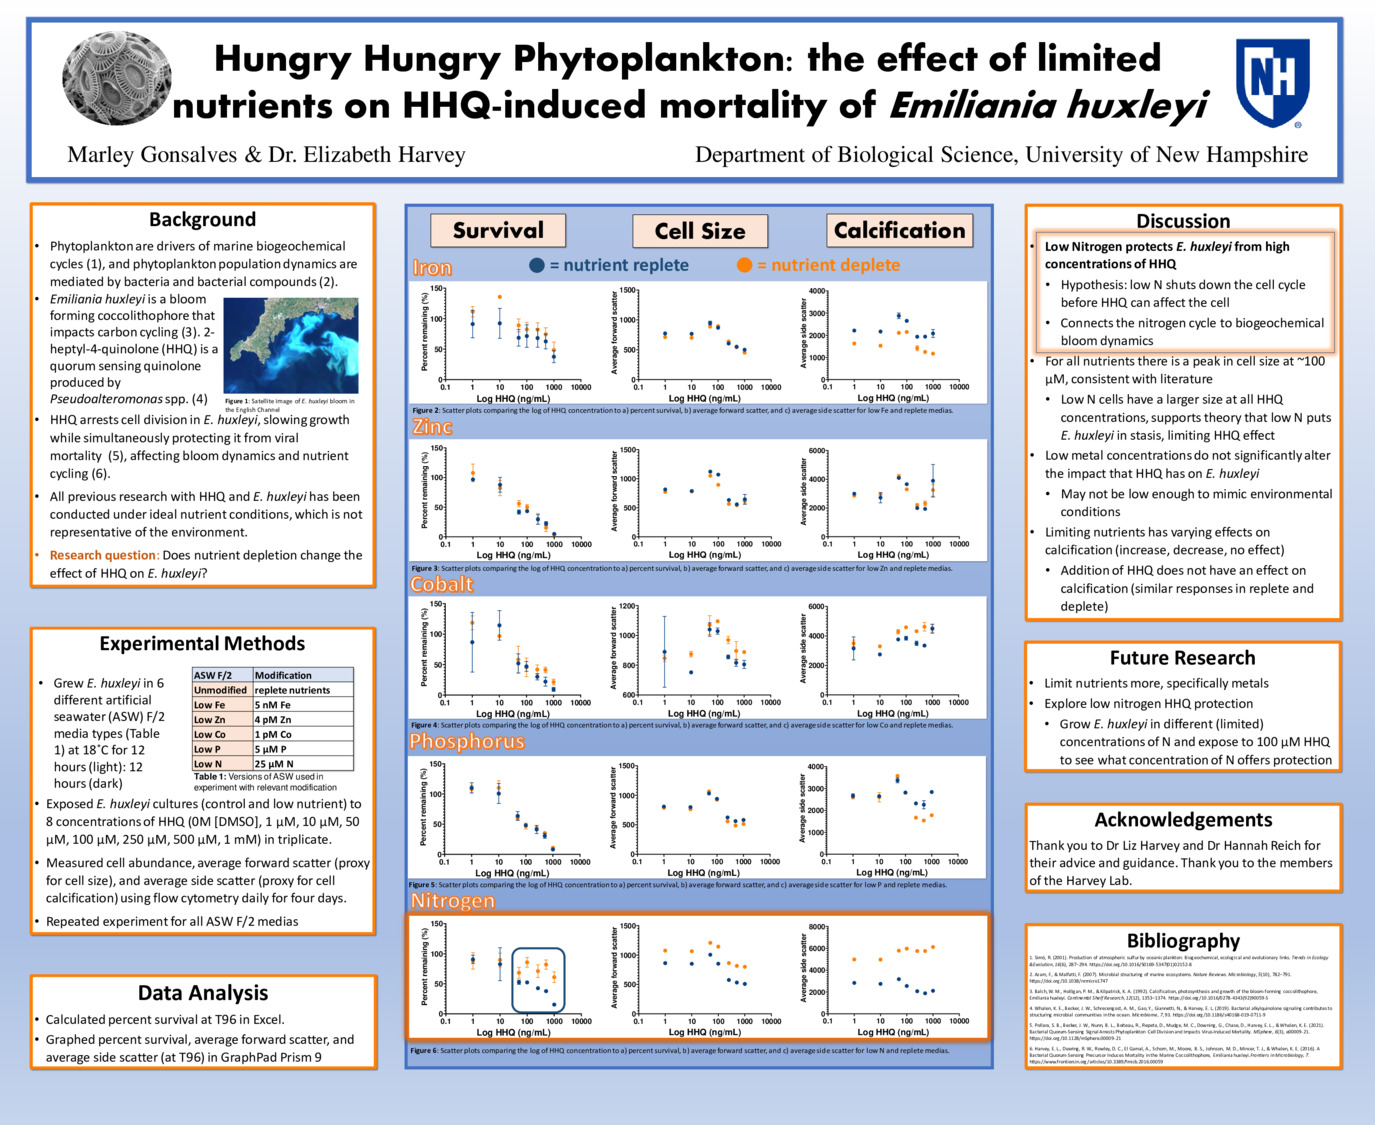 Hungry Hungry Phytoplankton: The Effect Of Limited Nutrients On Hhq-Induced Mortality Of Emiliania Huxleyi by mgg1026